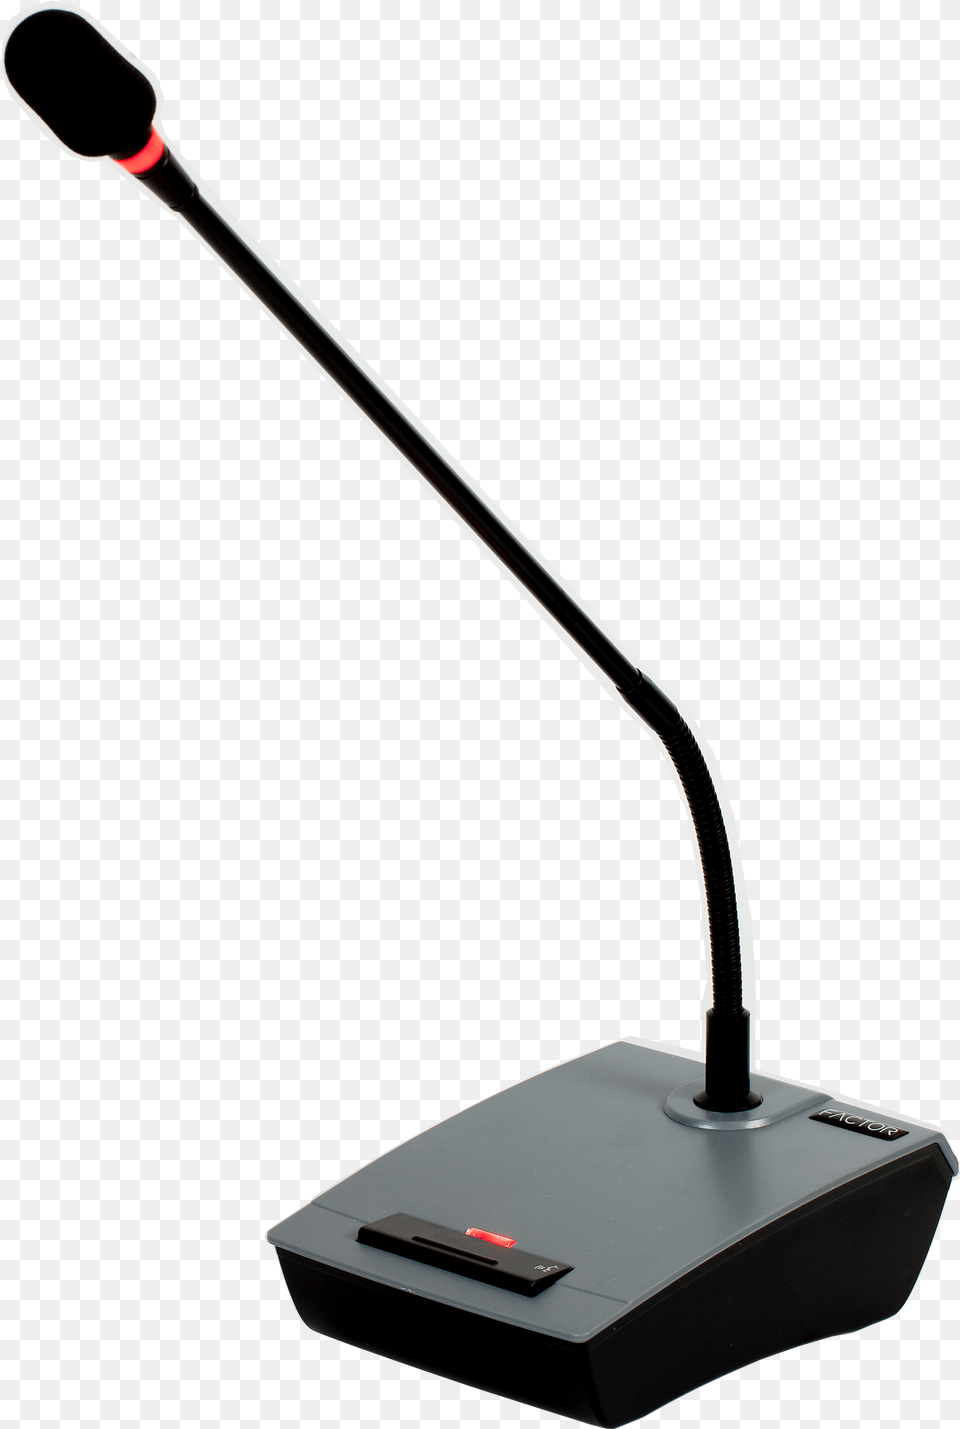 Series Conference Microphones Microphone Conference, Electrical Device, Lamp, Smoke Pipe Png Image